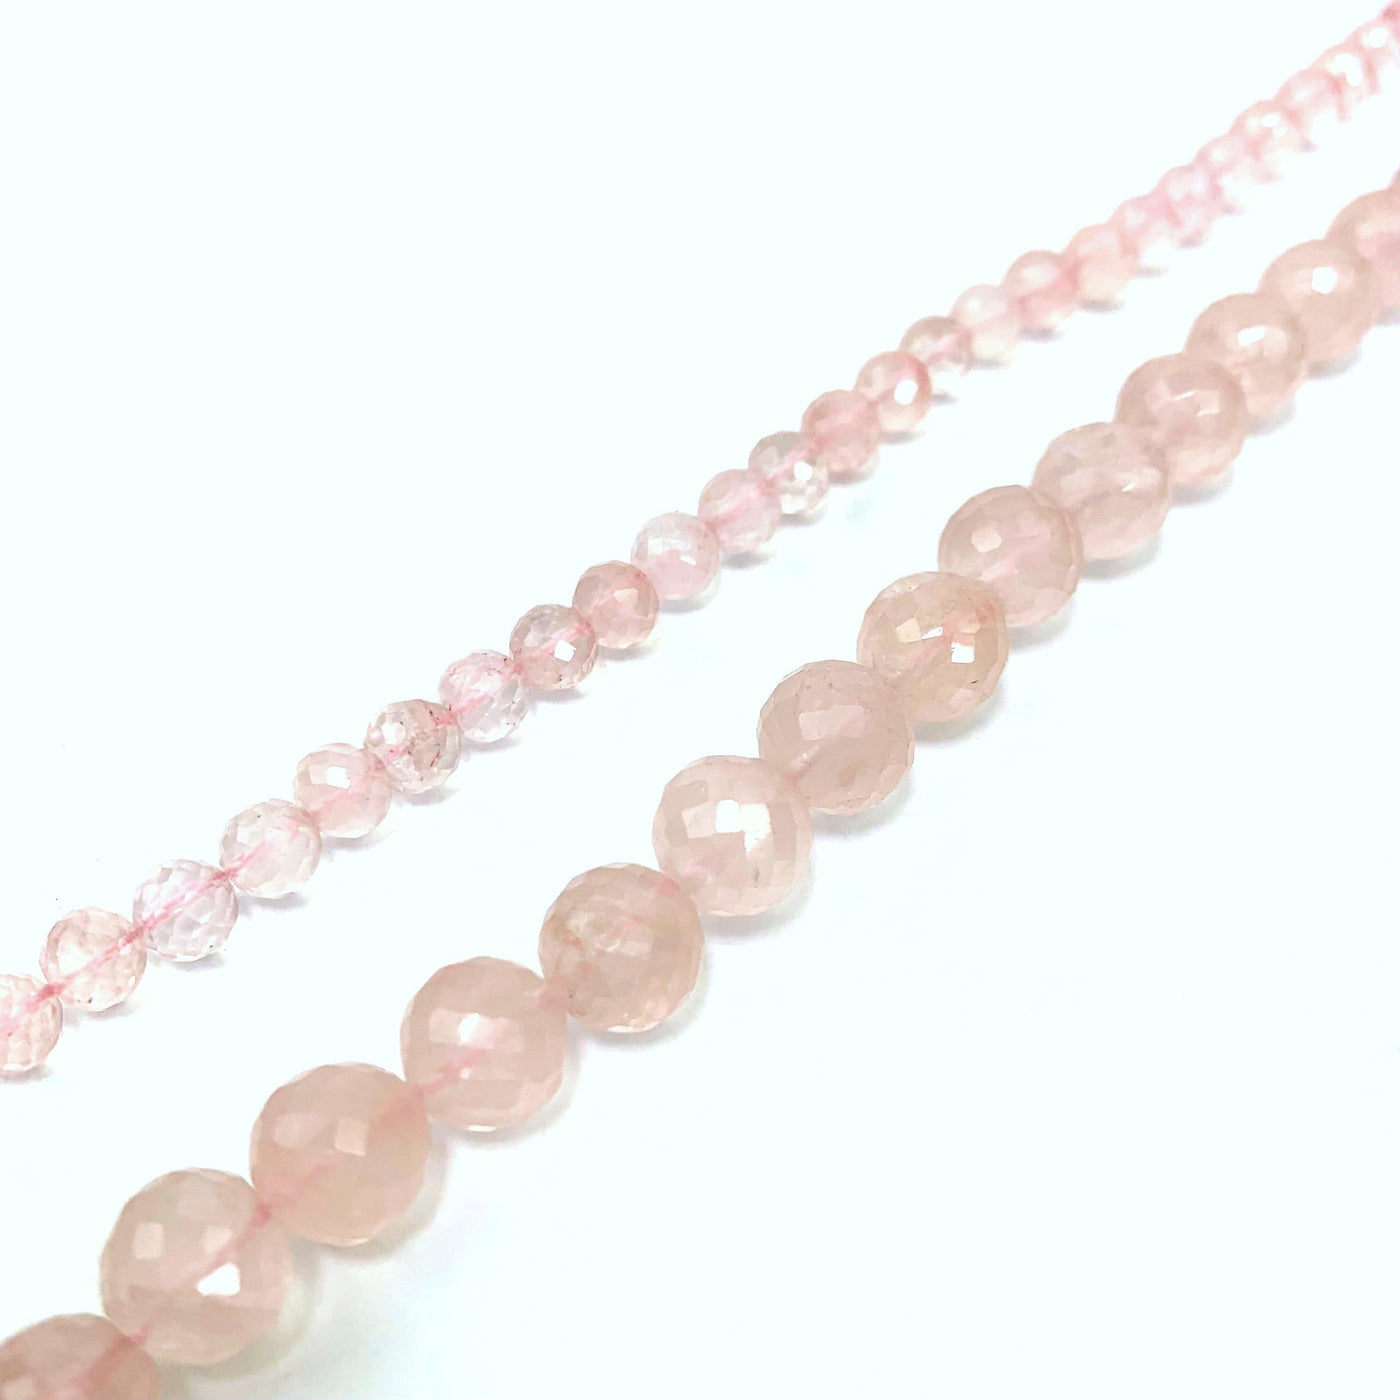 both strands of rose quartz beads ( left small, right large) on a white background